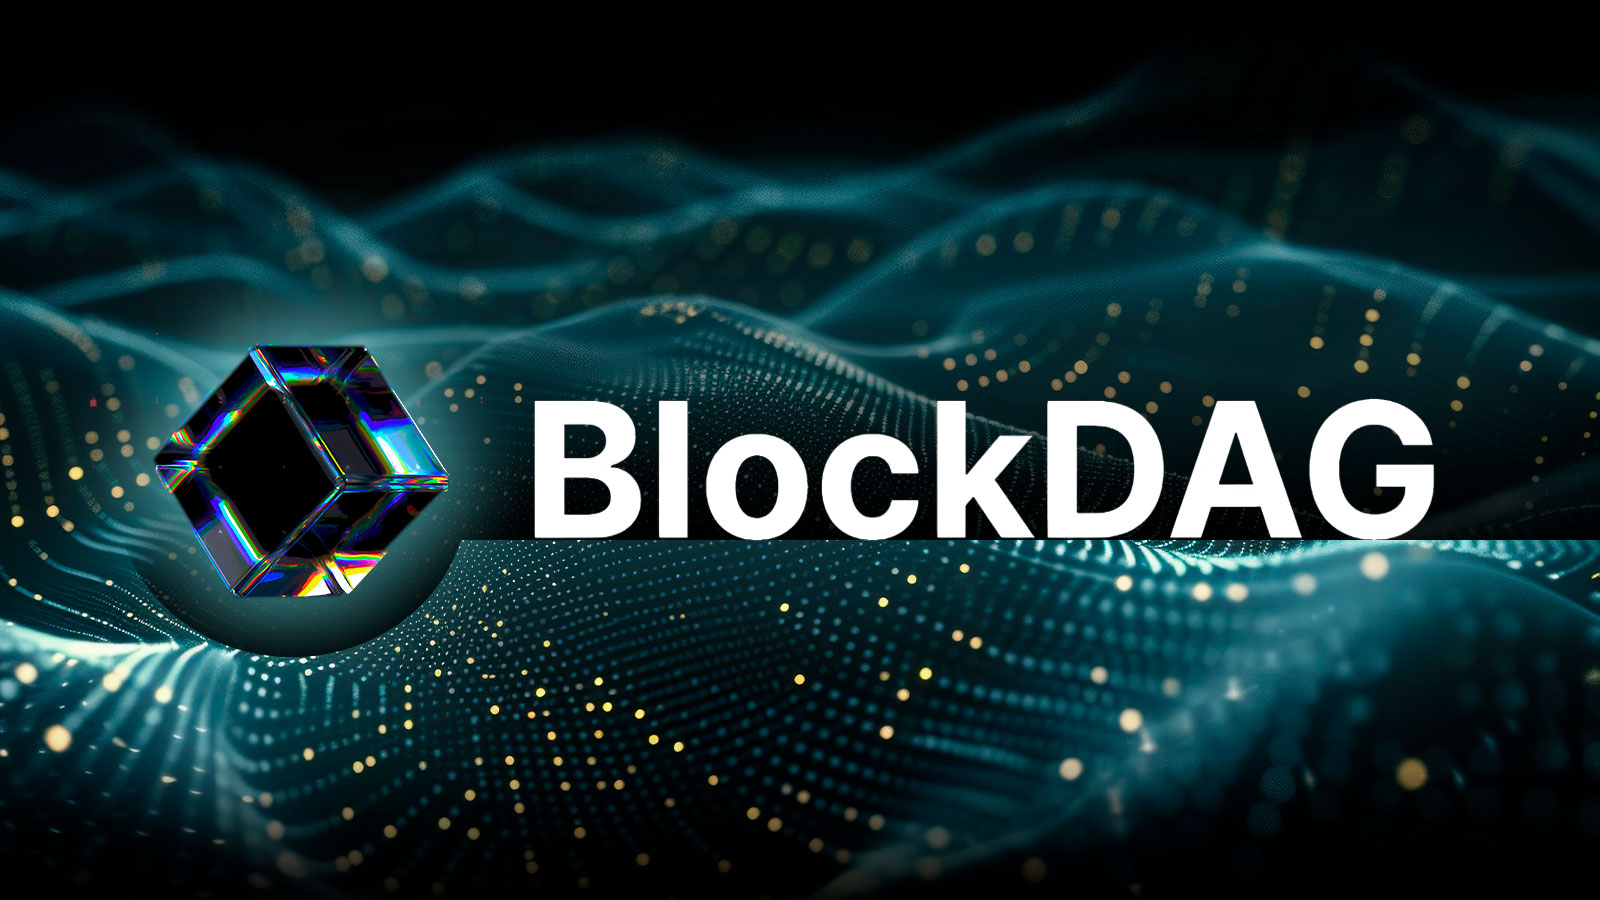 BlockDAG Introduces New Payment Methods, Shiba Inu's Price Jump And XRP's Whale Activity